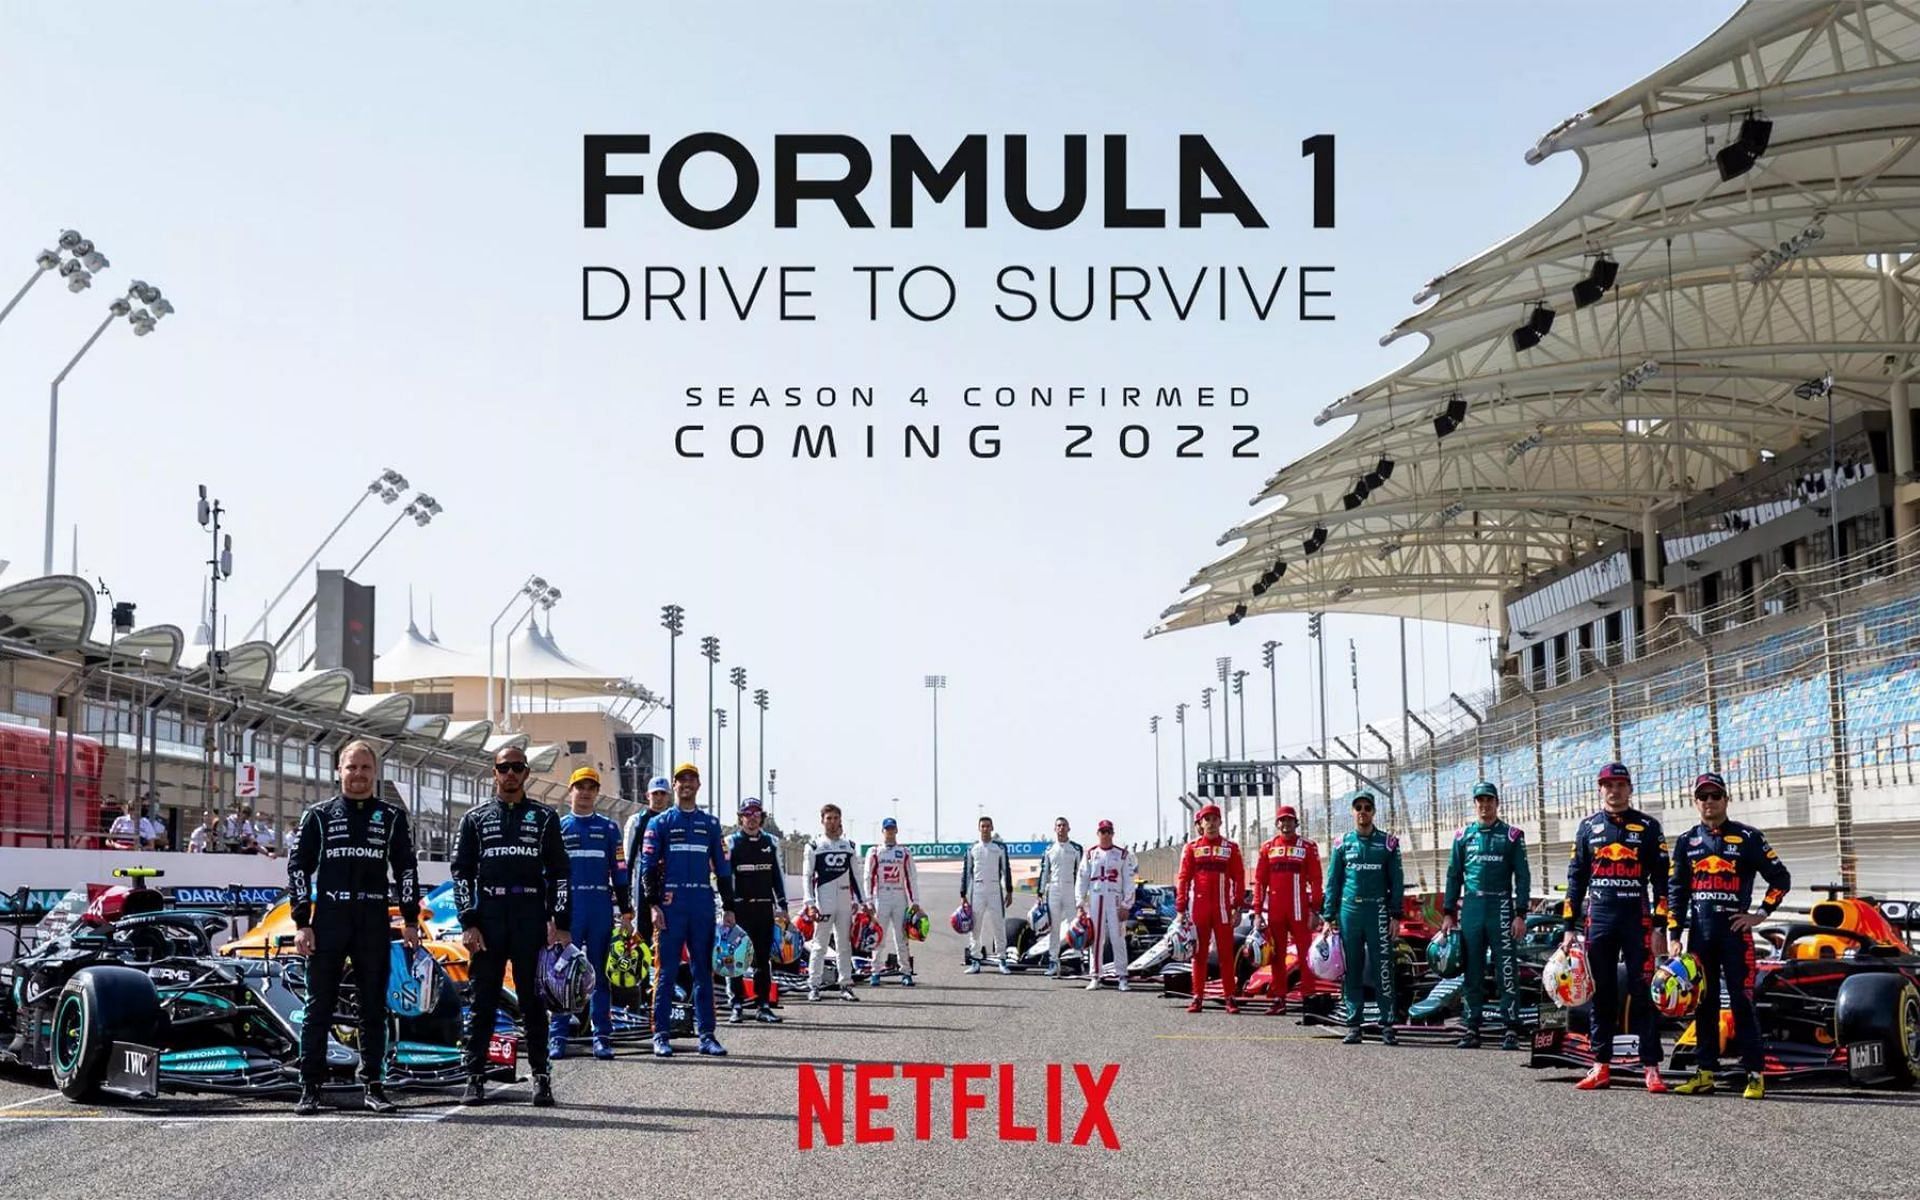 Drive to Survive Season 4 is mostly focused on Max Verstappen and Lewis Hamilton&#039;s 2021 title battle.